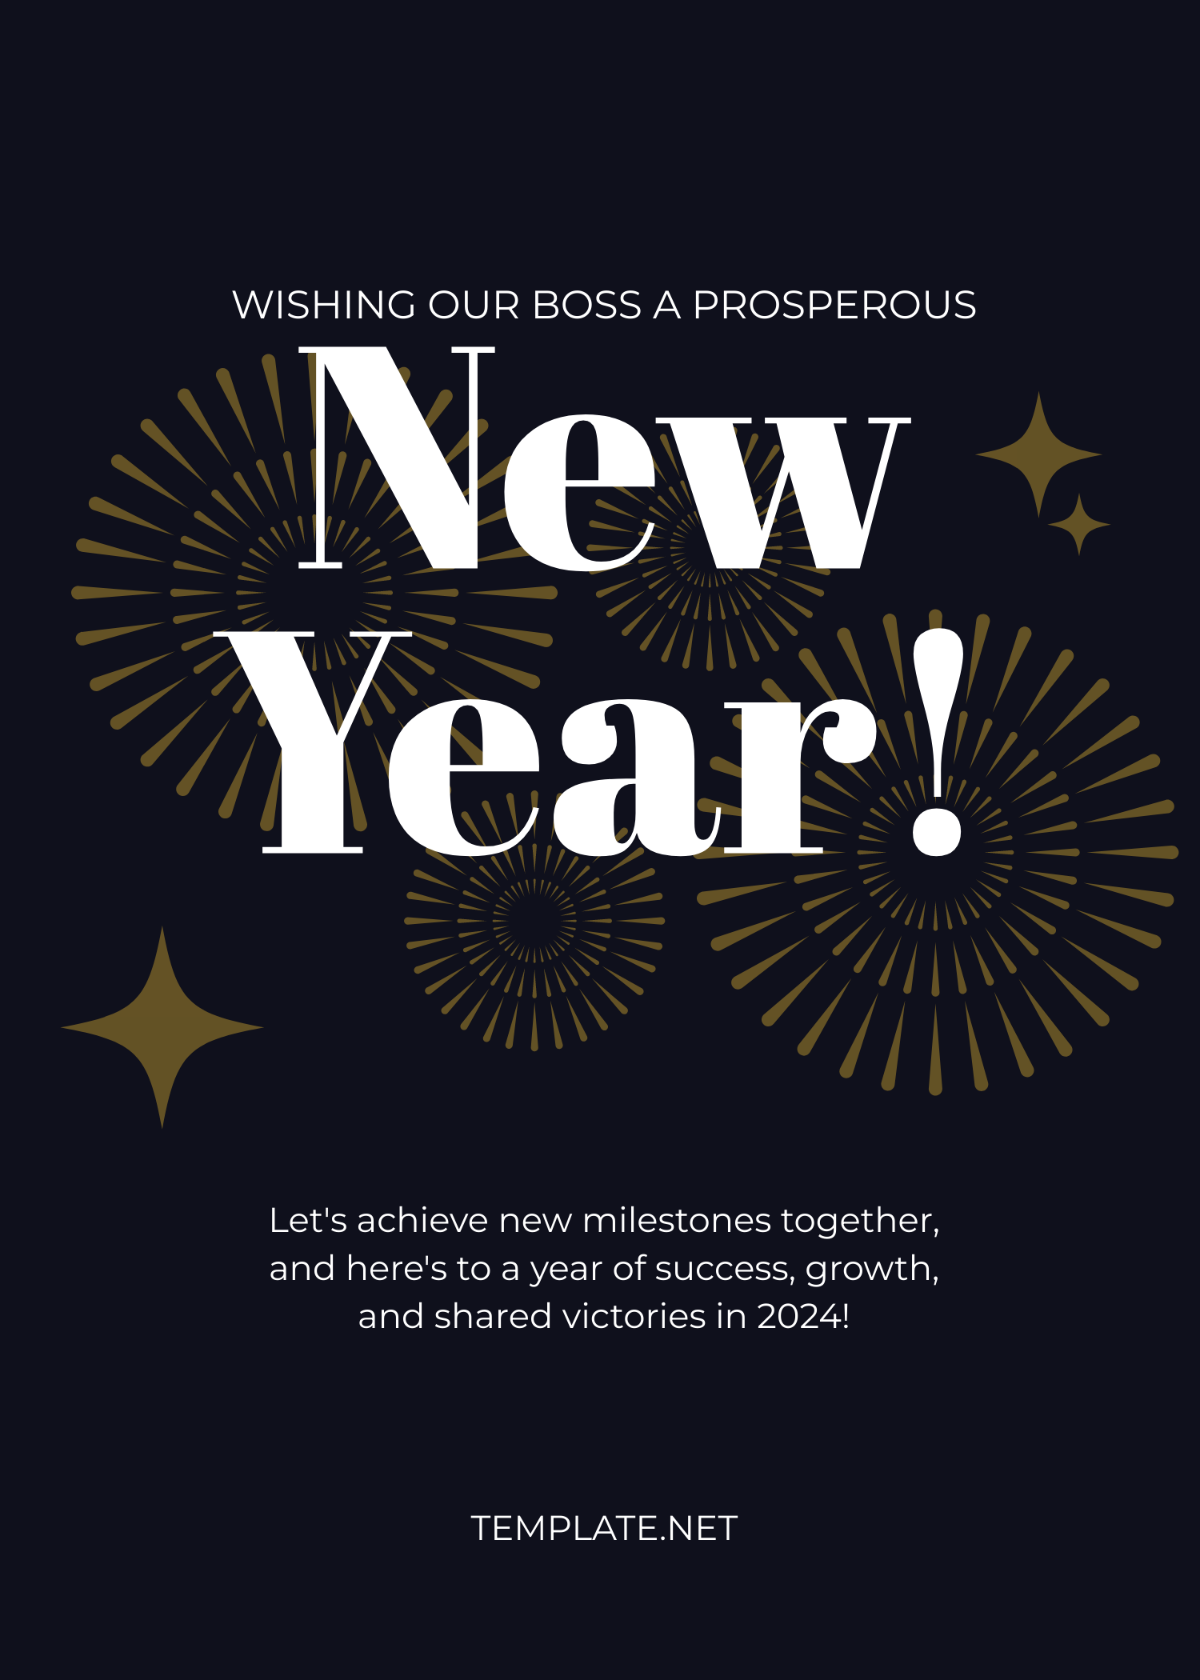 New Year Greeting for Boss